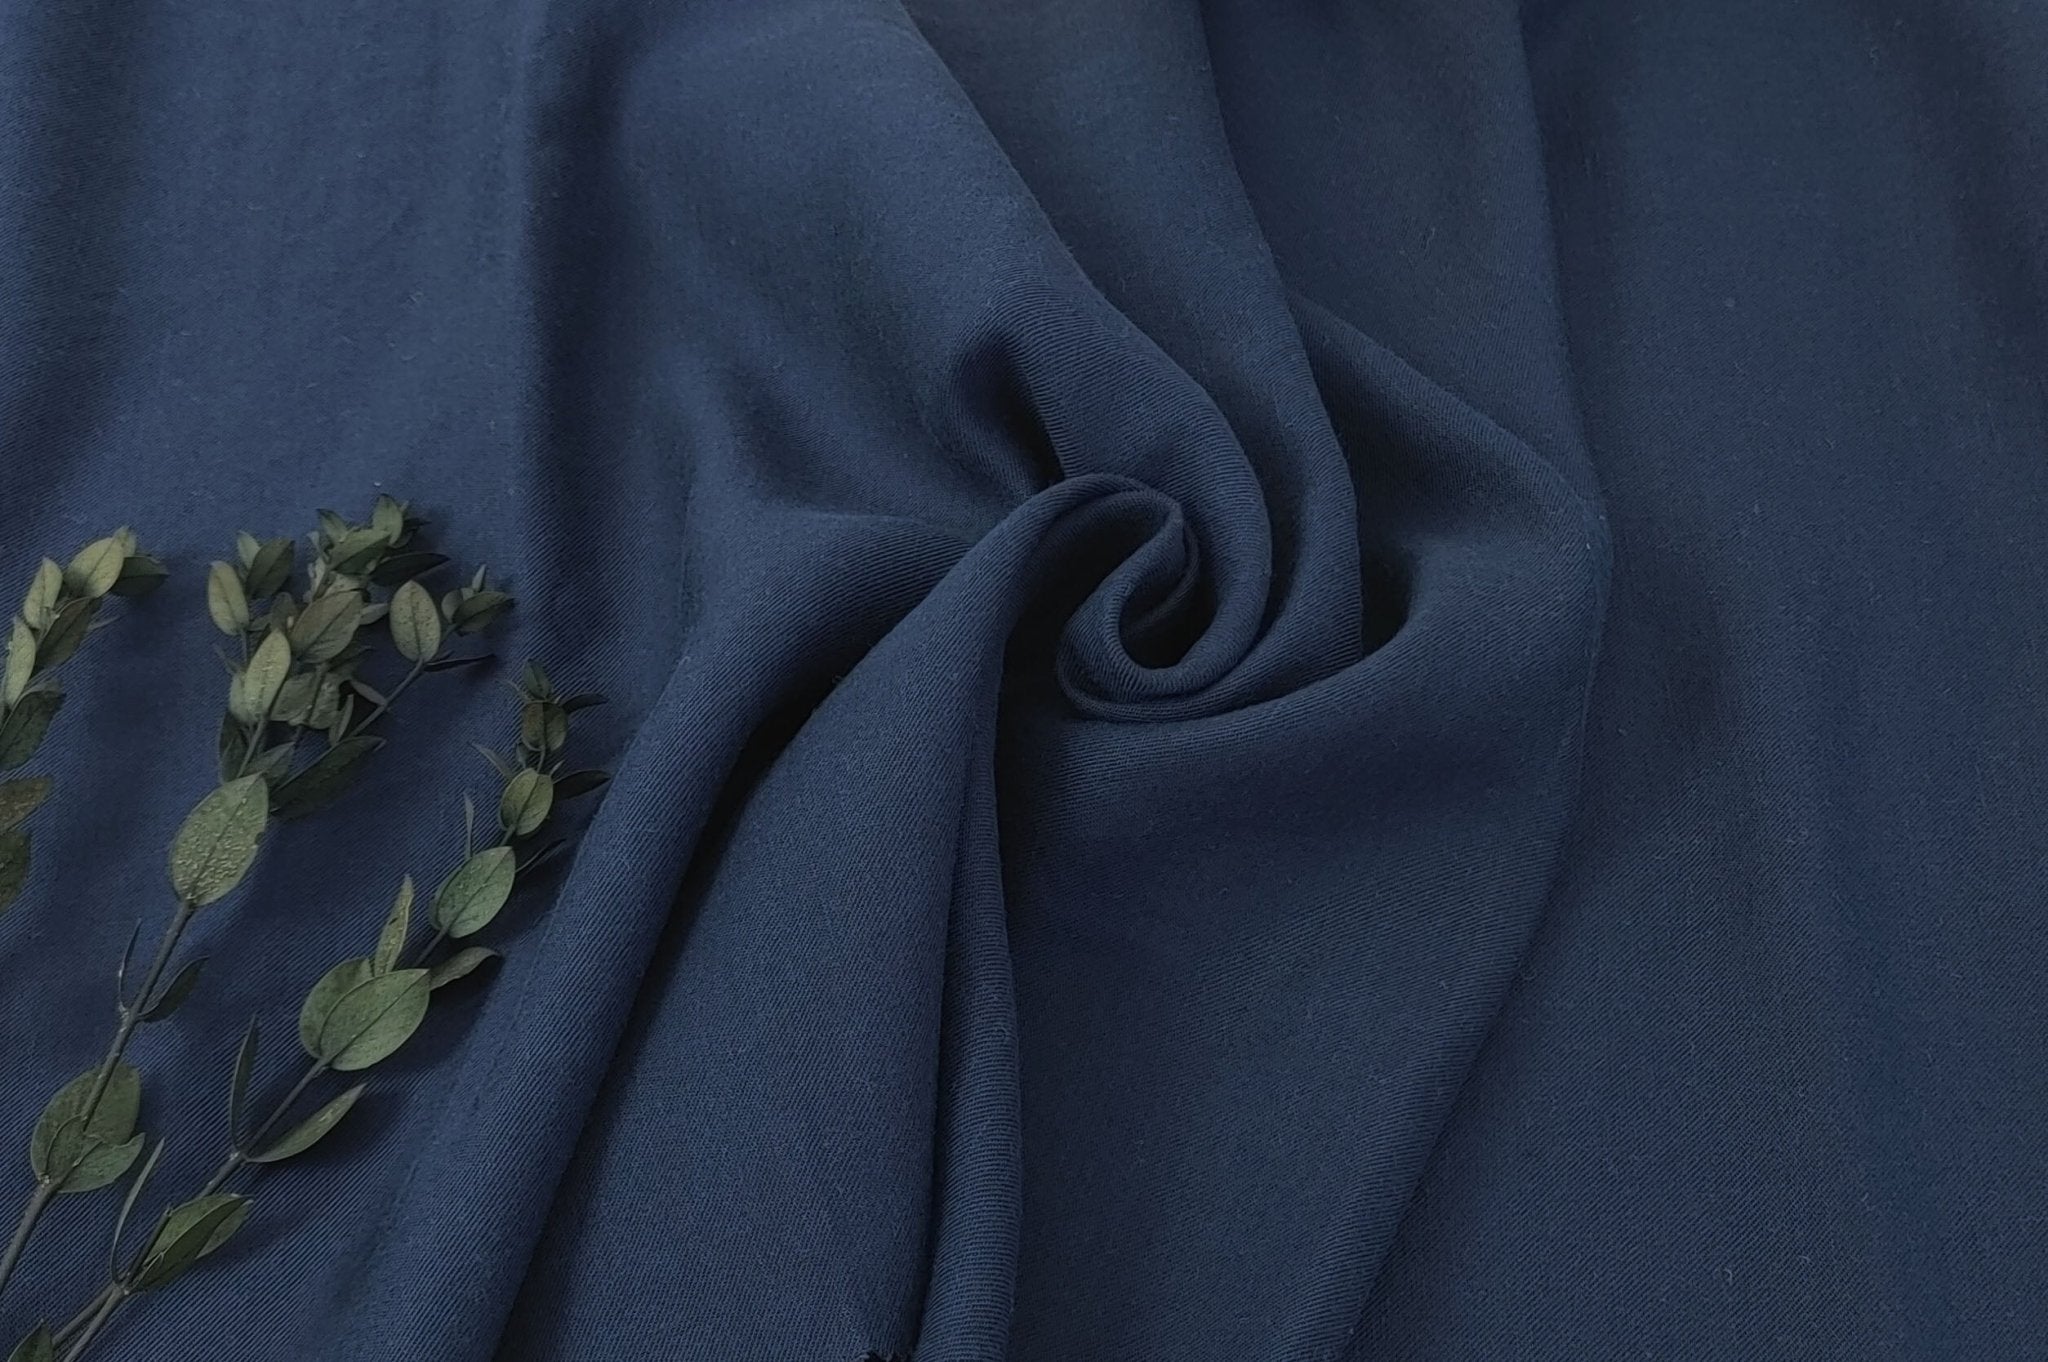 Linen Tencel Twill Fabric for Versatile and Elegant Creations 3217 6895 3530 - The Linen Lab - Navy